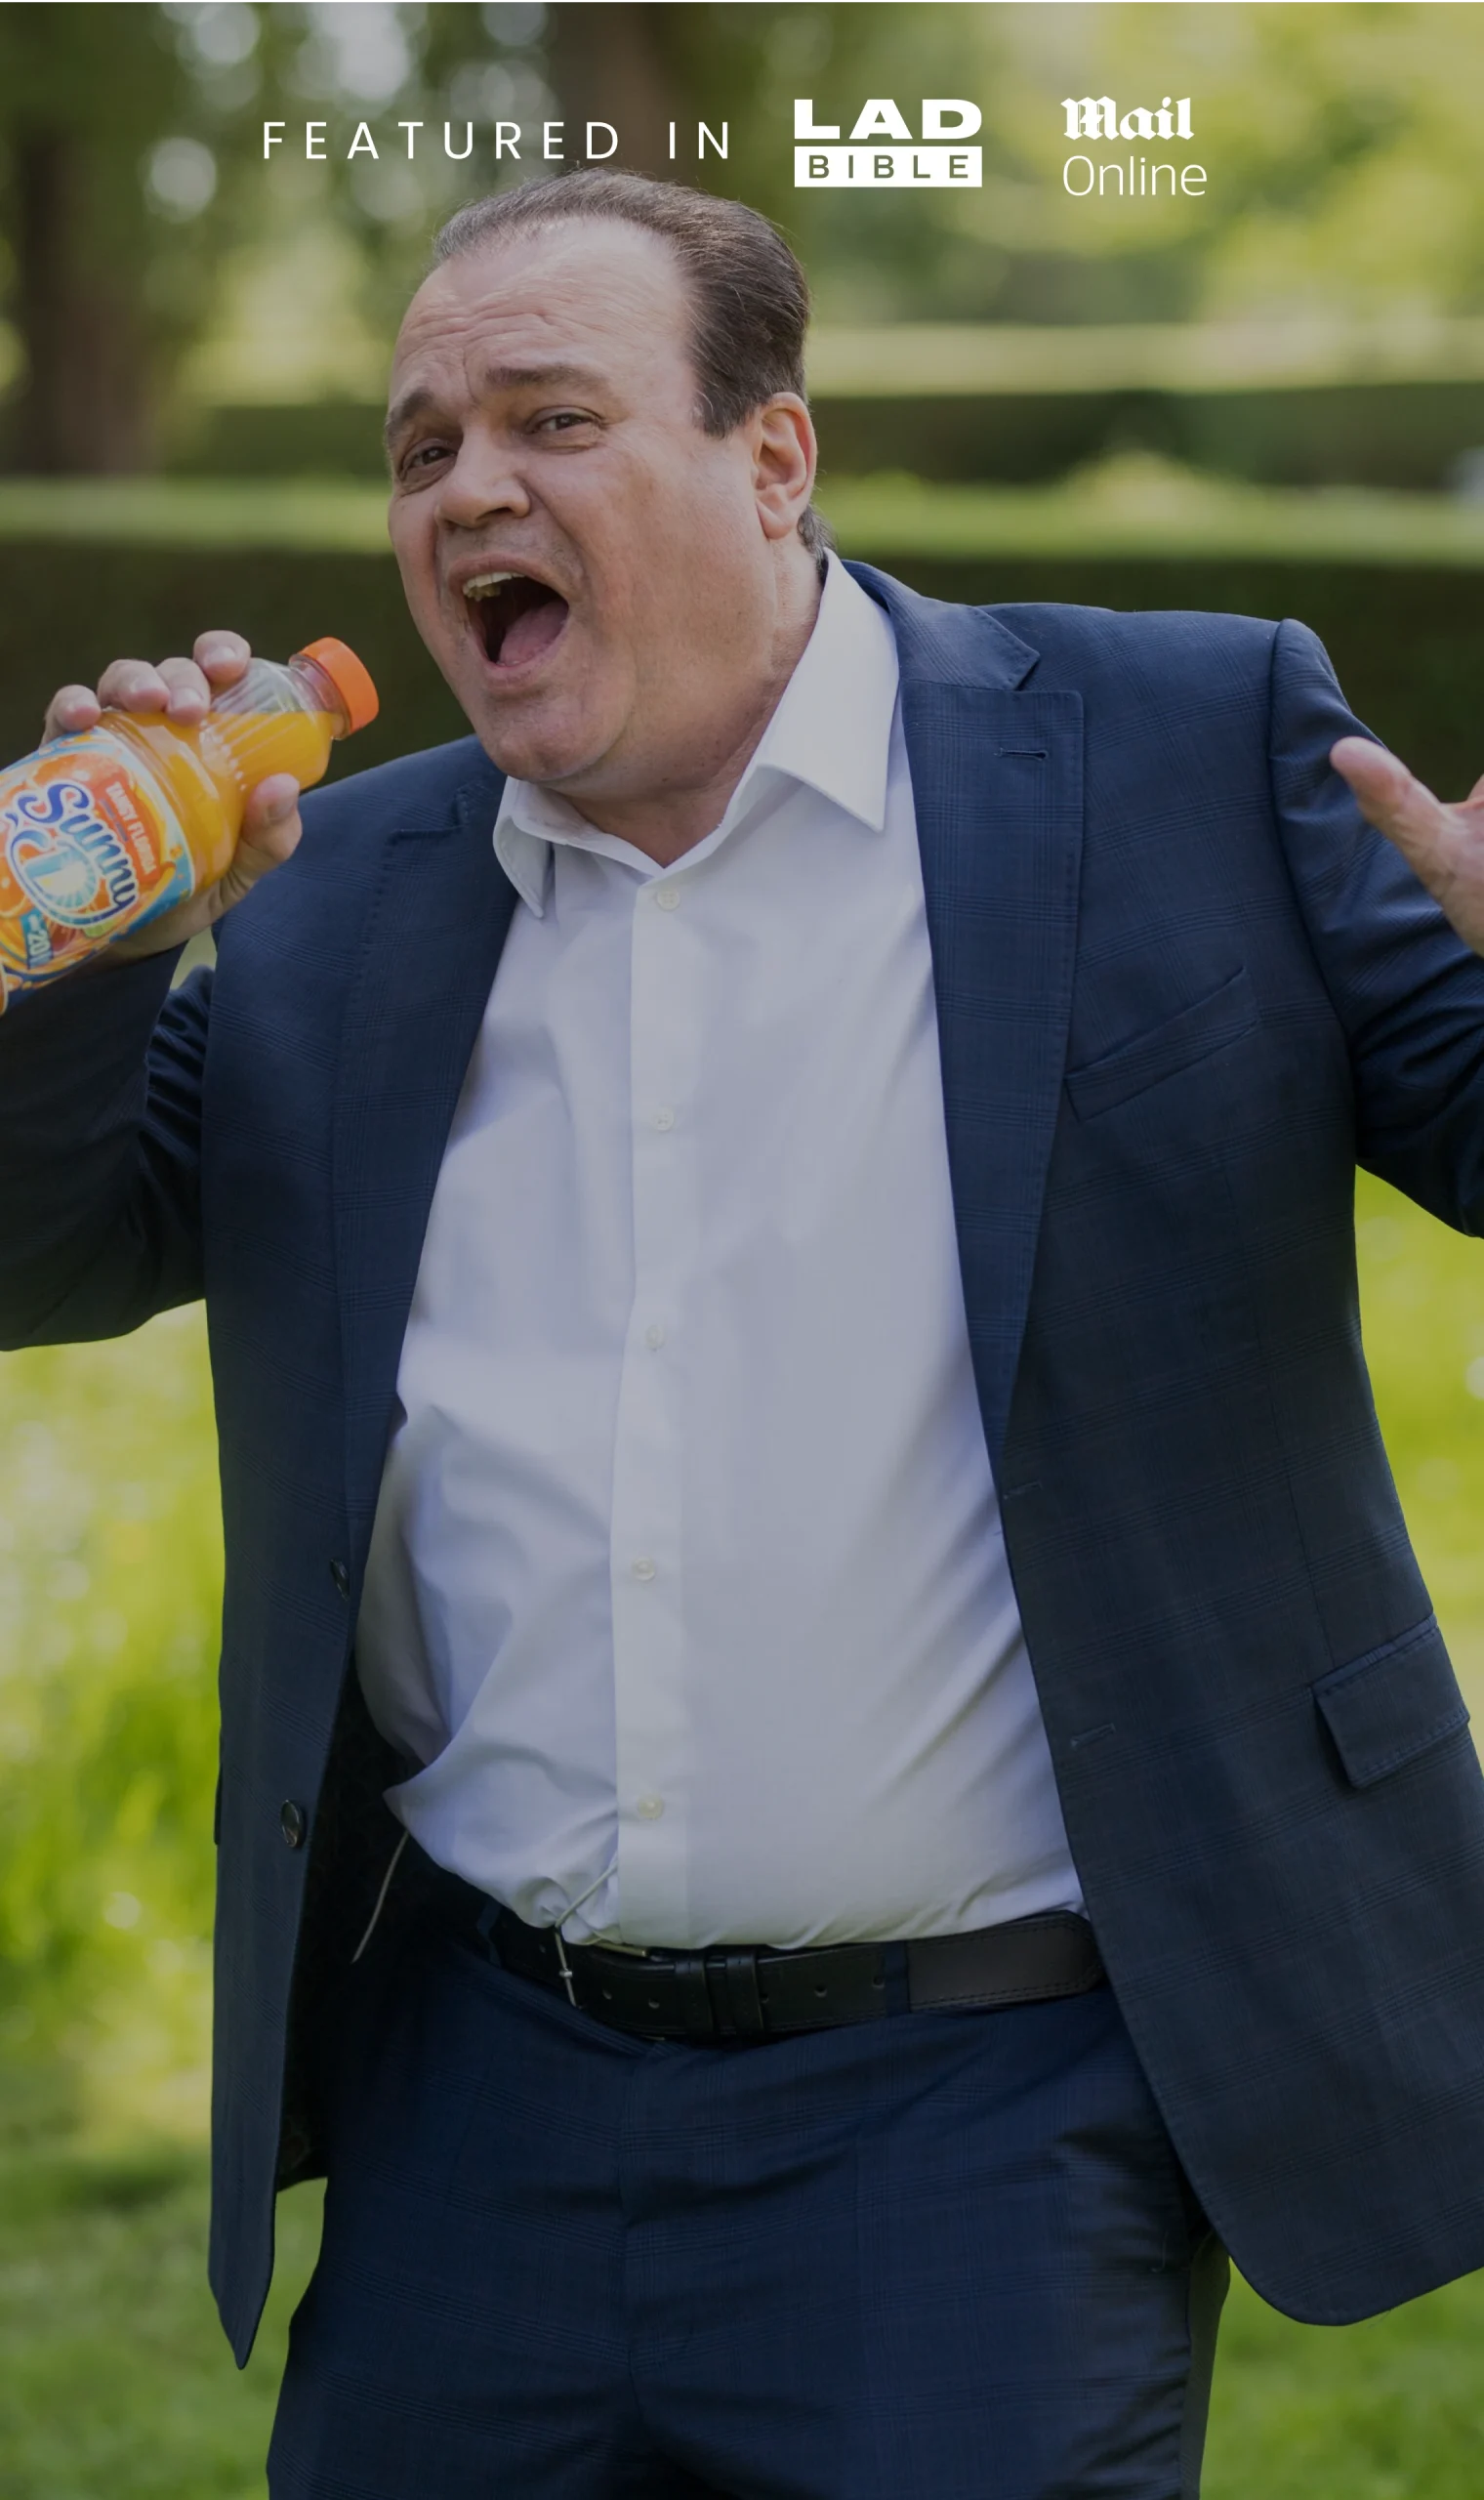 A person in a suit holding a bottle of juice